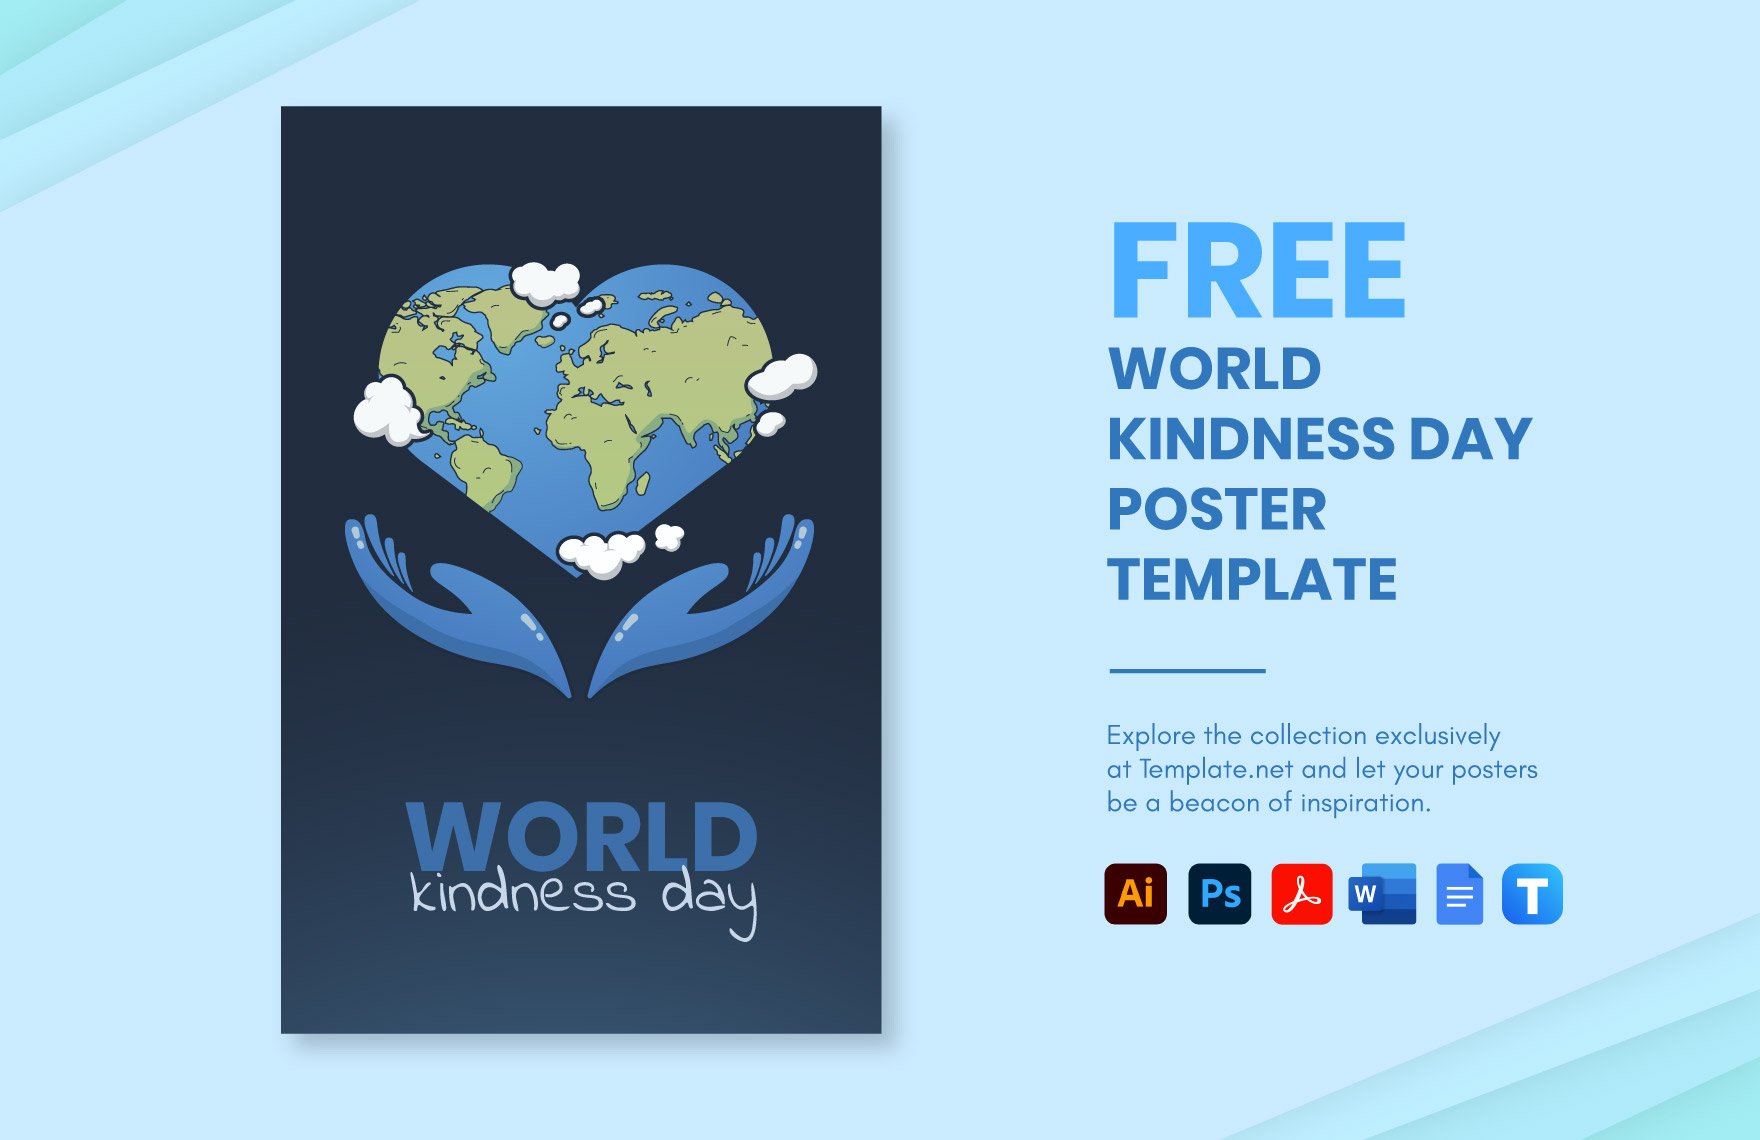 World Kindness Day Poster Template in Word, Google Docs, PDF, Illustrator, PSD